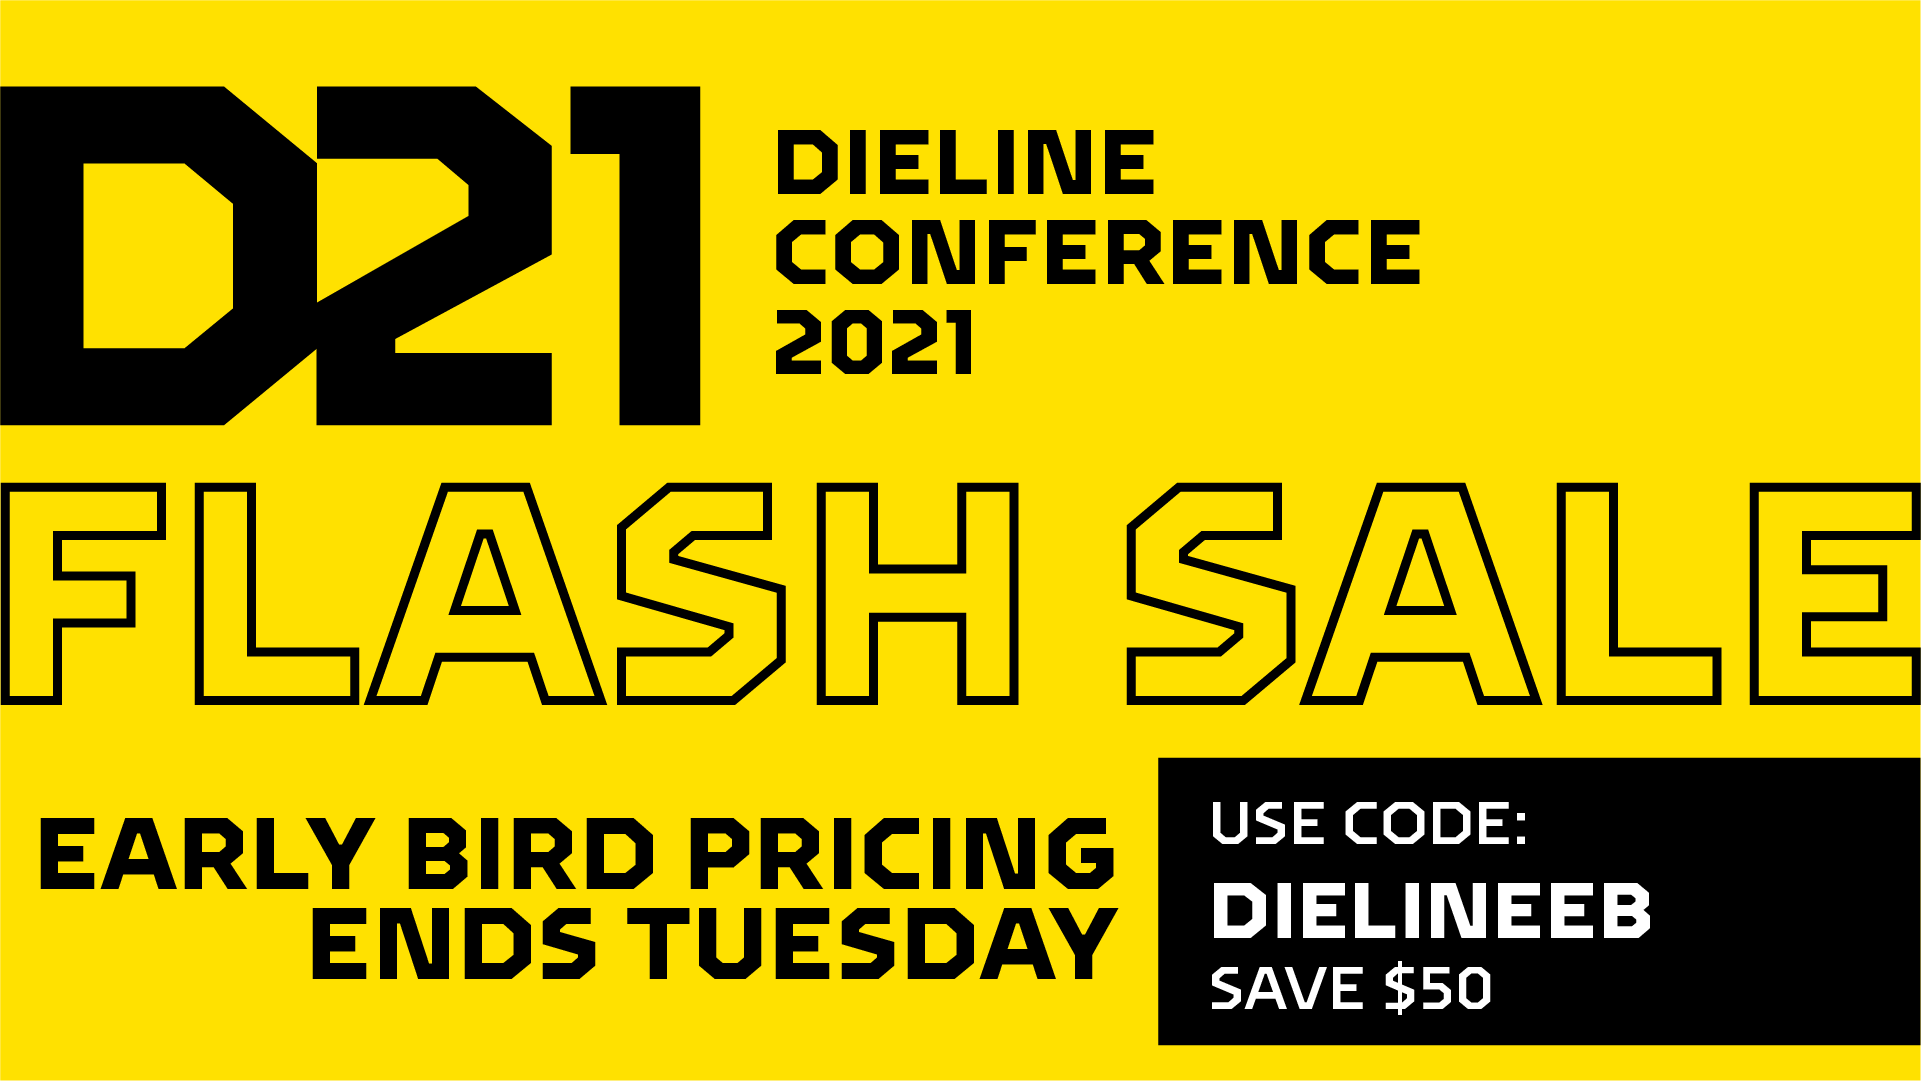 D21 FLASH SALE! Early Bird Pricing Until Tuesday with Code DIELINEEB